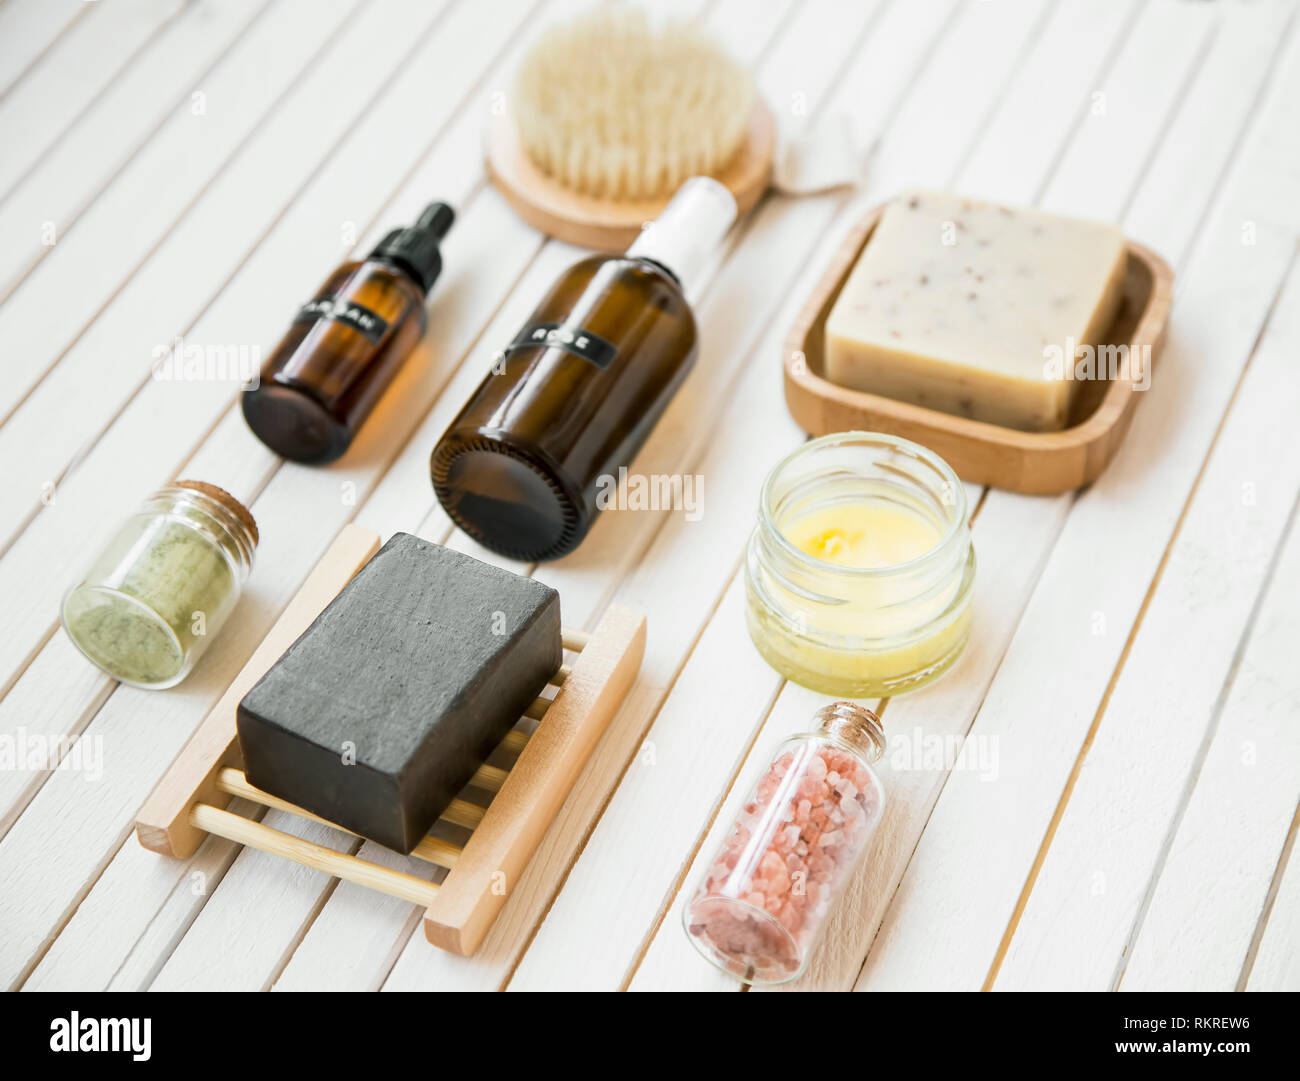 Spa natural products on white wooden background, natural skincare and beauty treatments, spa still life Stock Photo